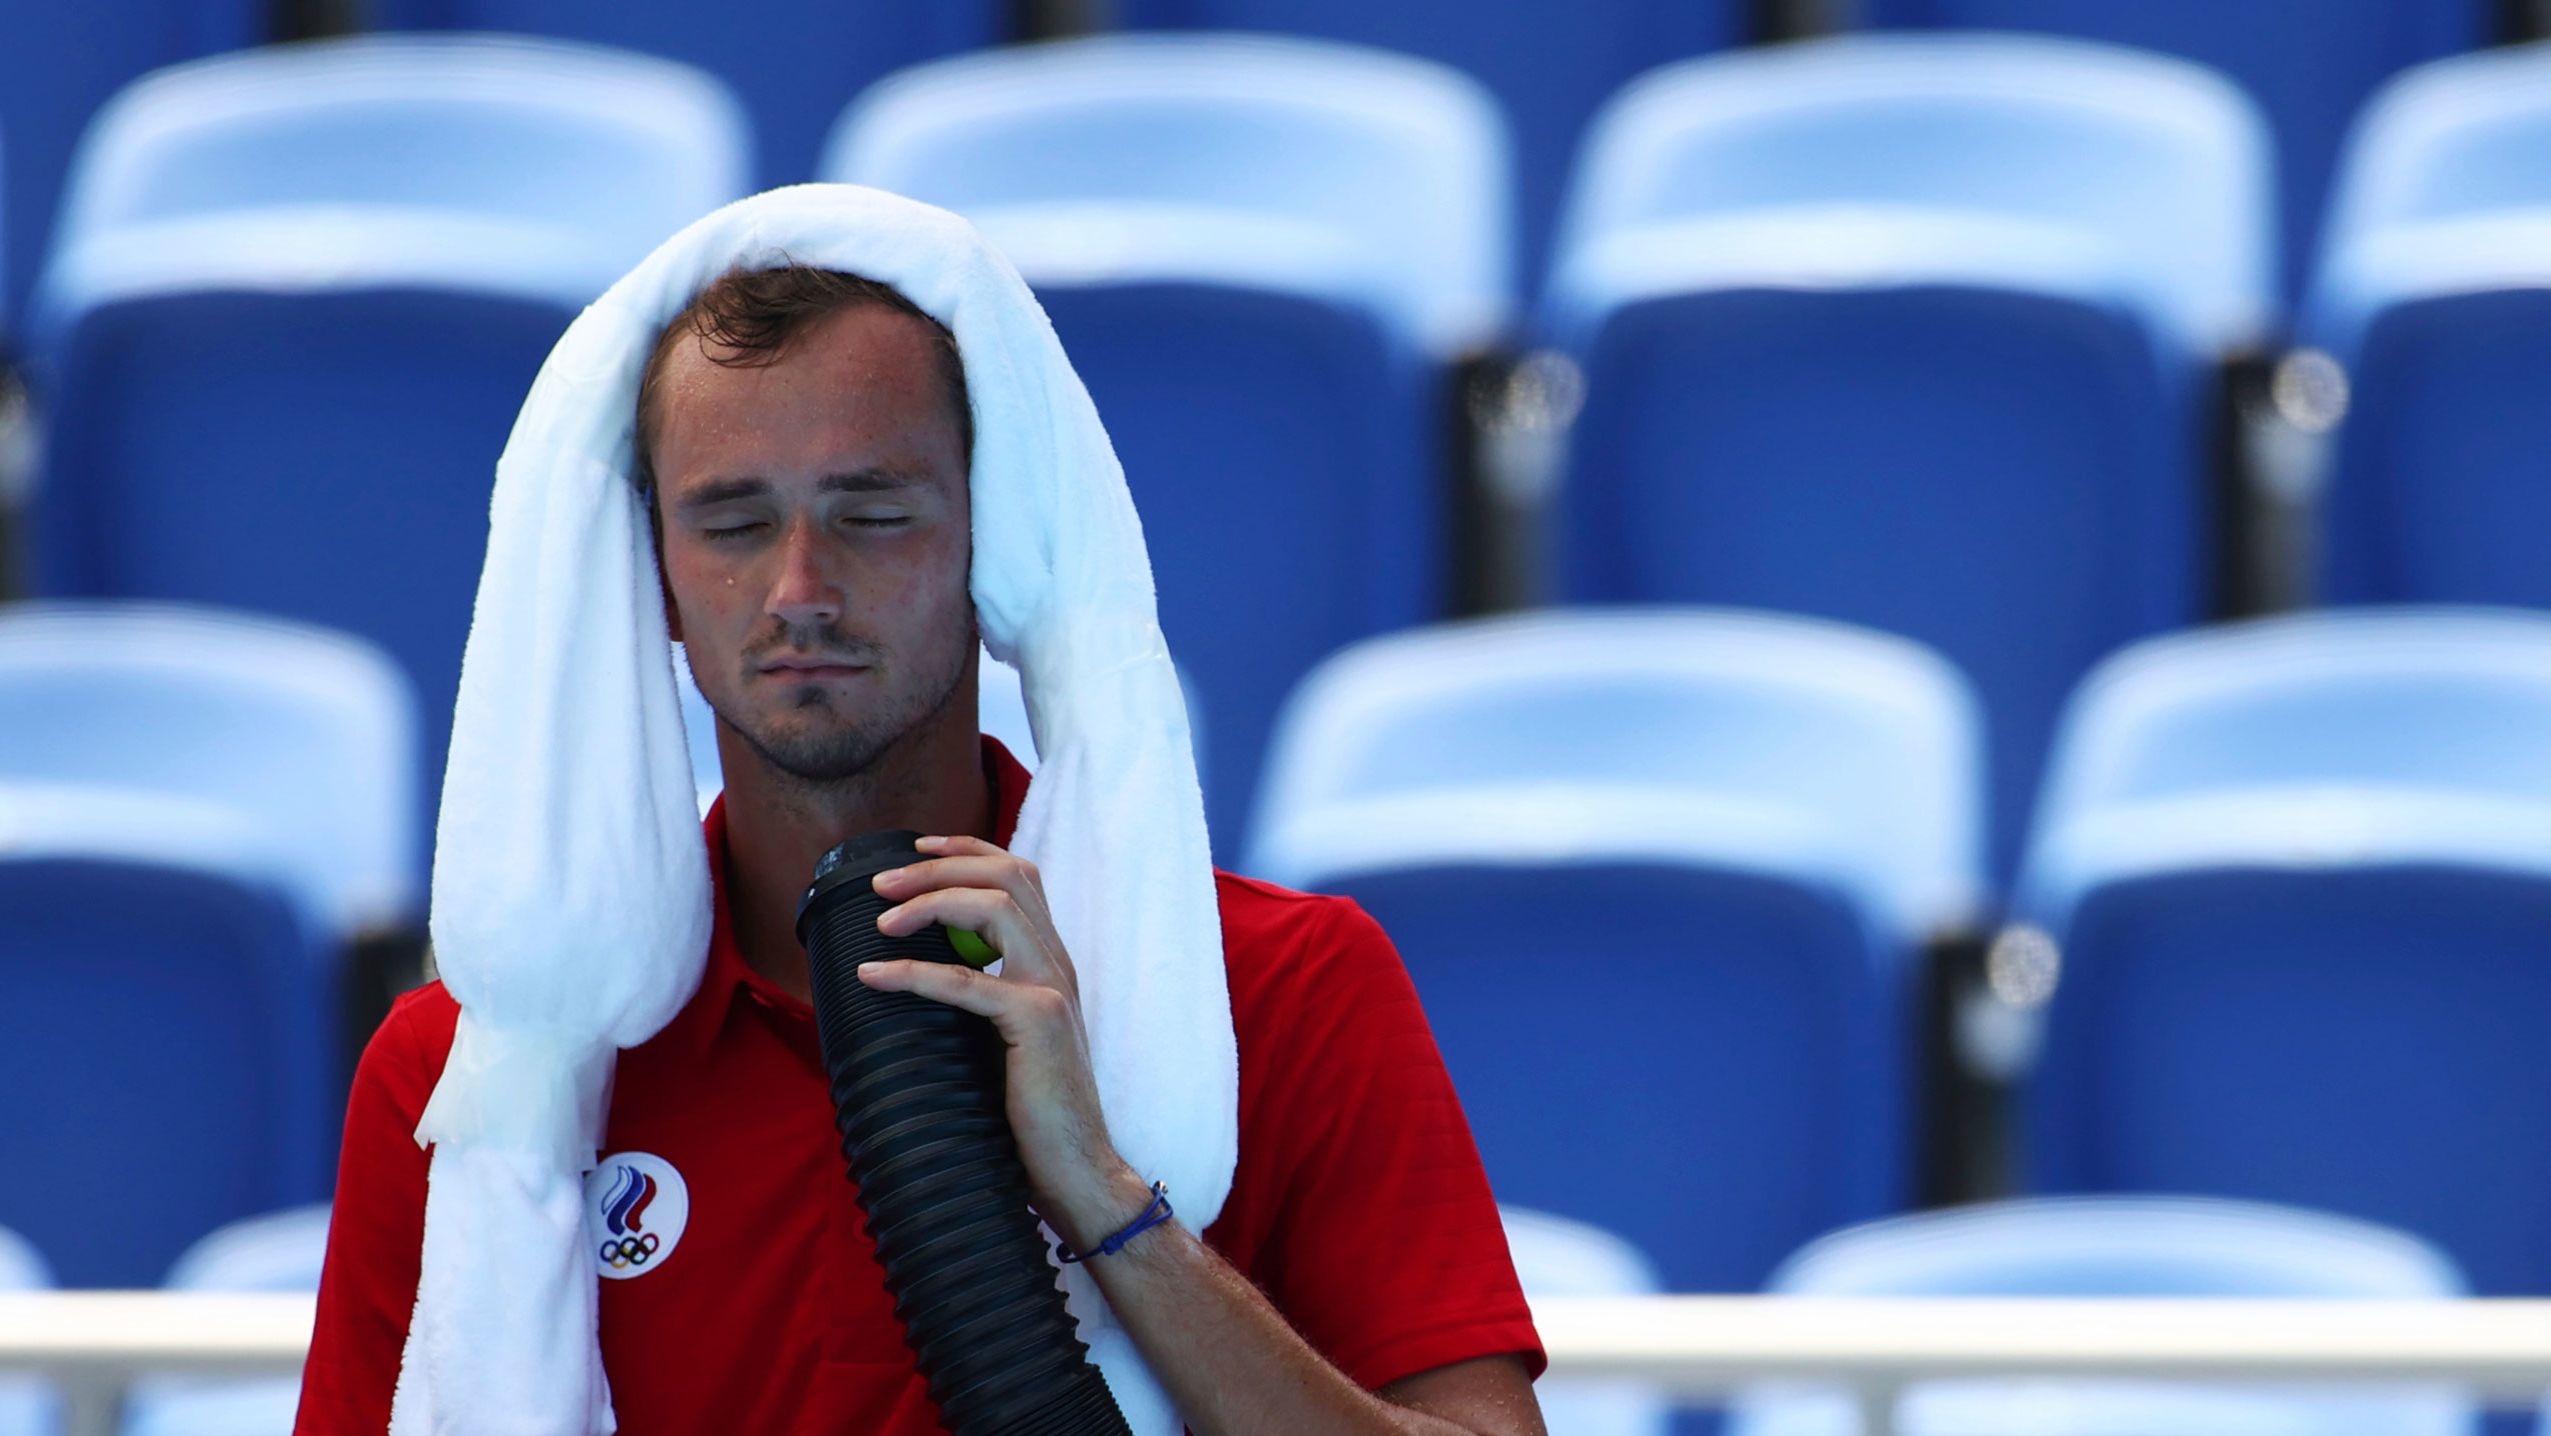 Daniil Medvedev complained about the heat during his match against Fabio Fognini on Wednesday.